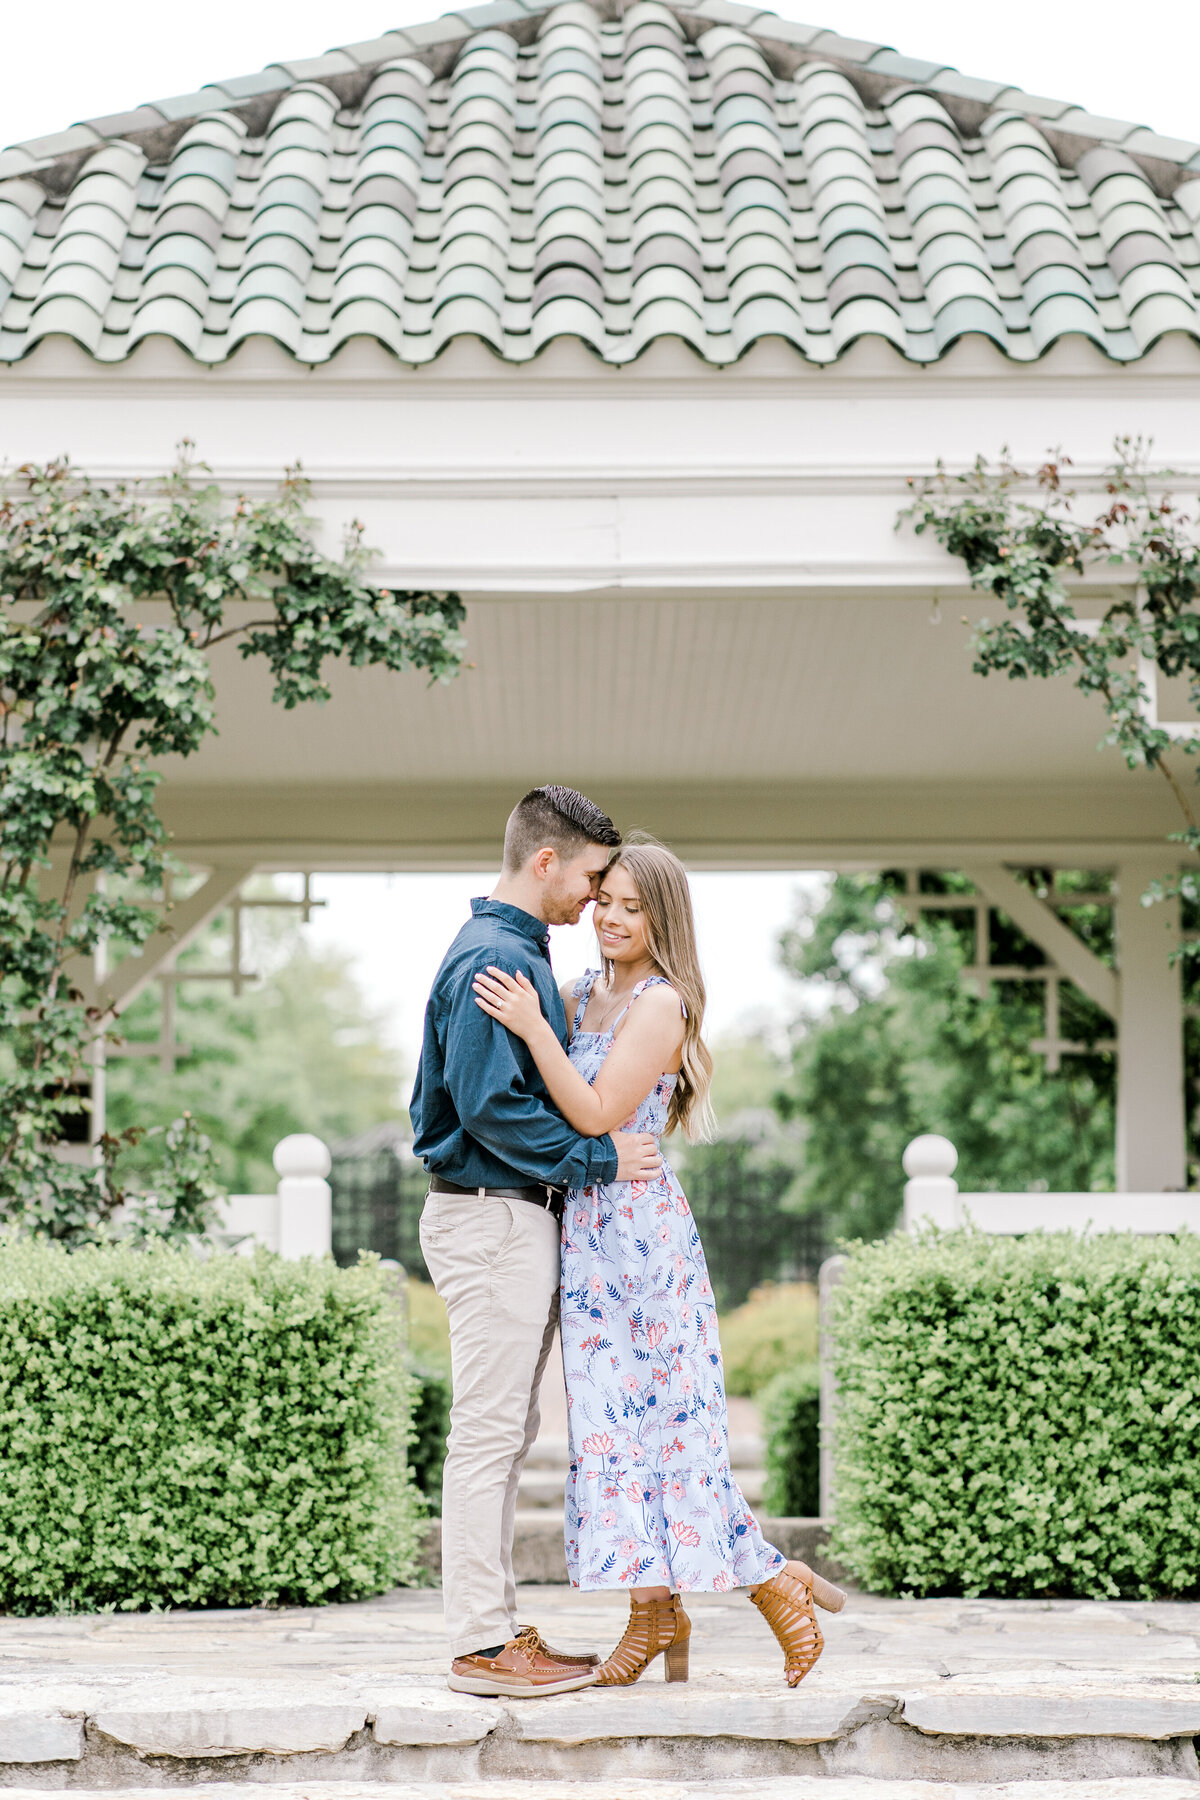 Hershey Garden Engagement Session Photography Photo-38